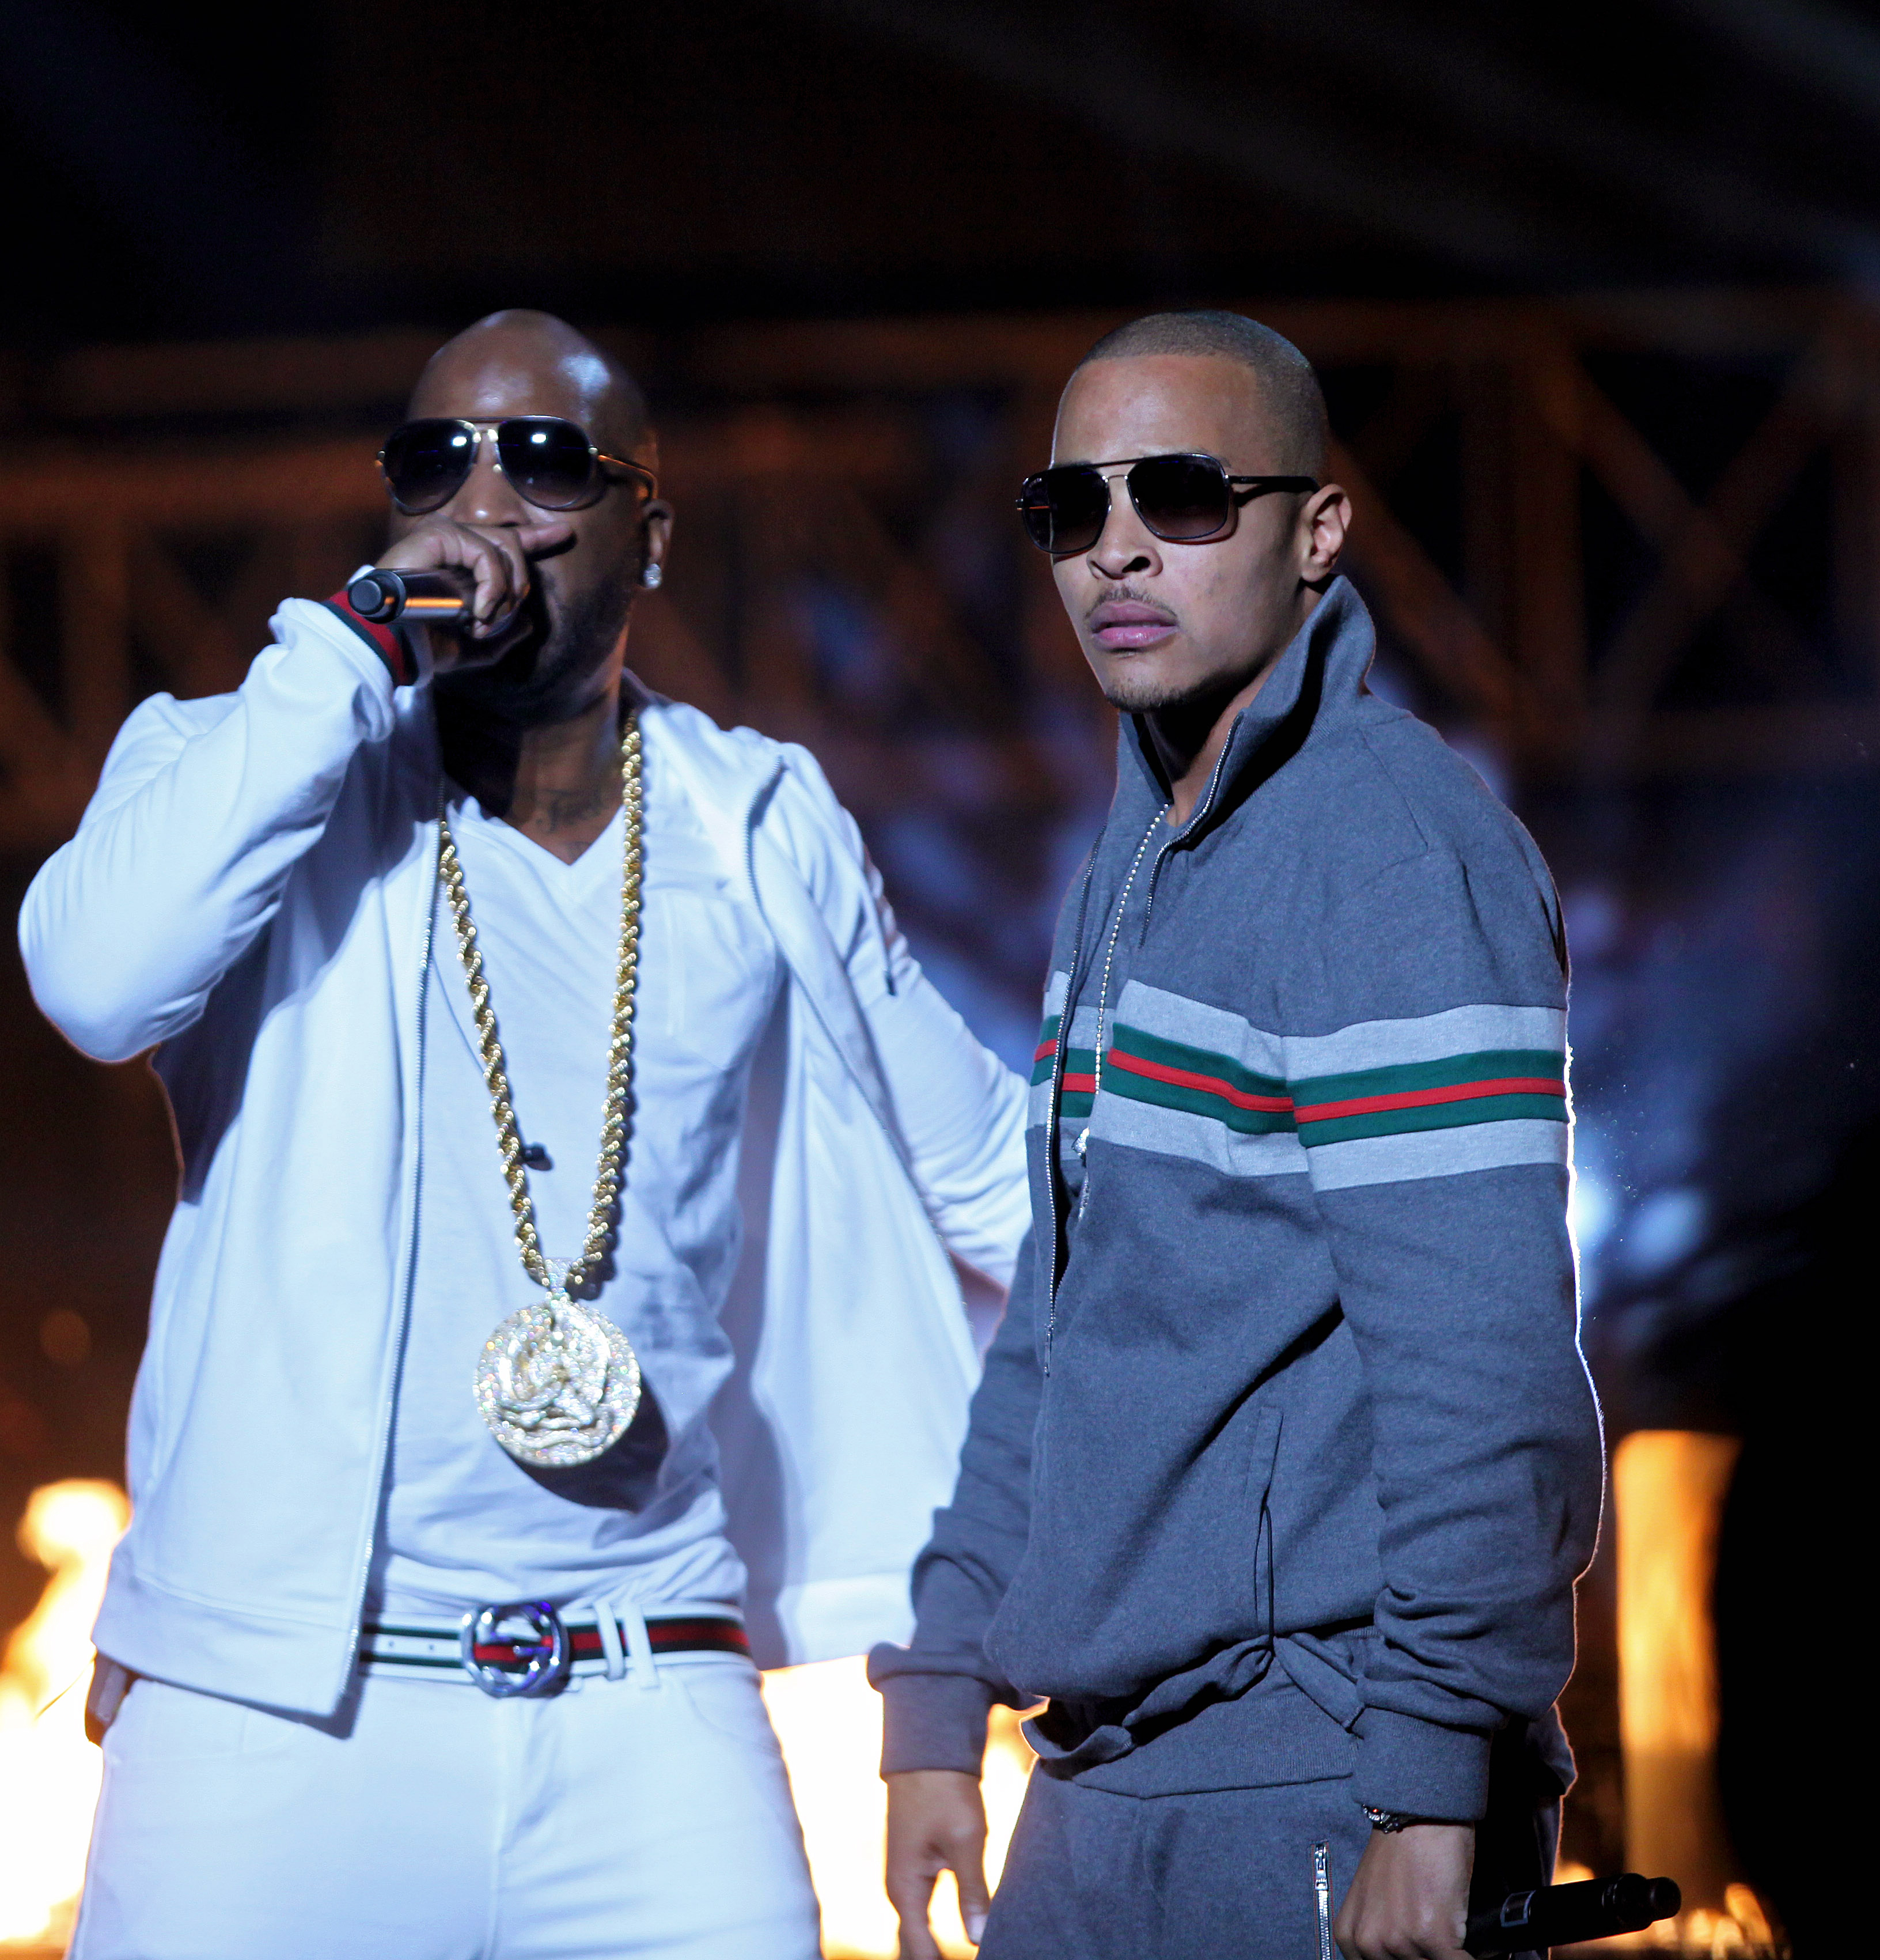 Rappers T.I. and Young Jeezy during the BET Hip Hop Awards in Atlanta on Oct. 1, 2011. (David Goldman—AP)